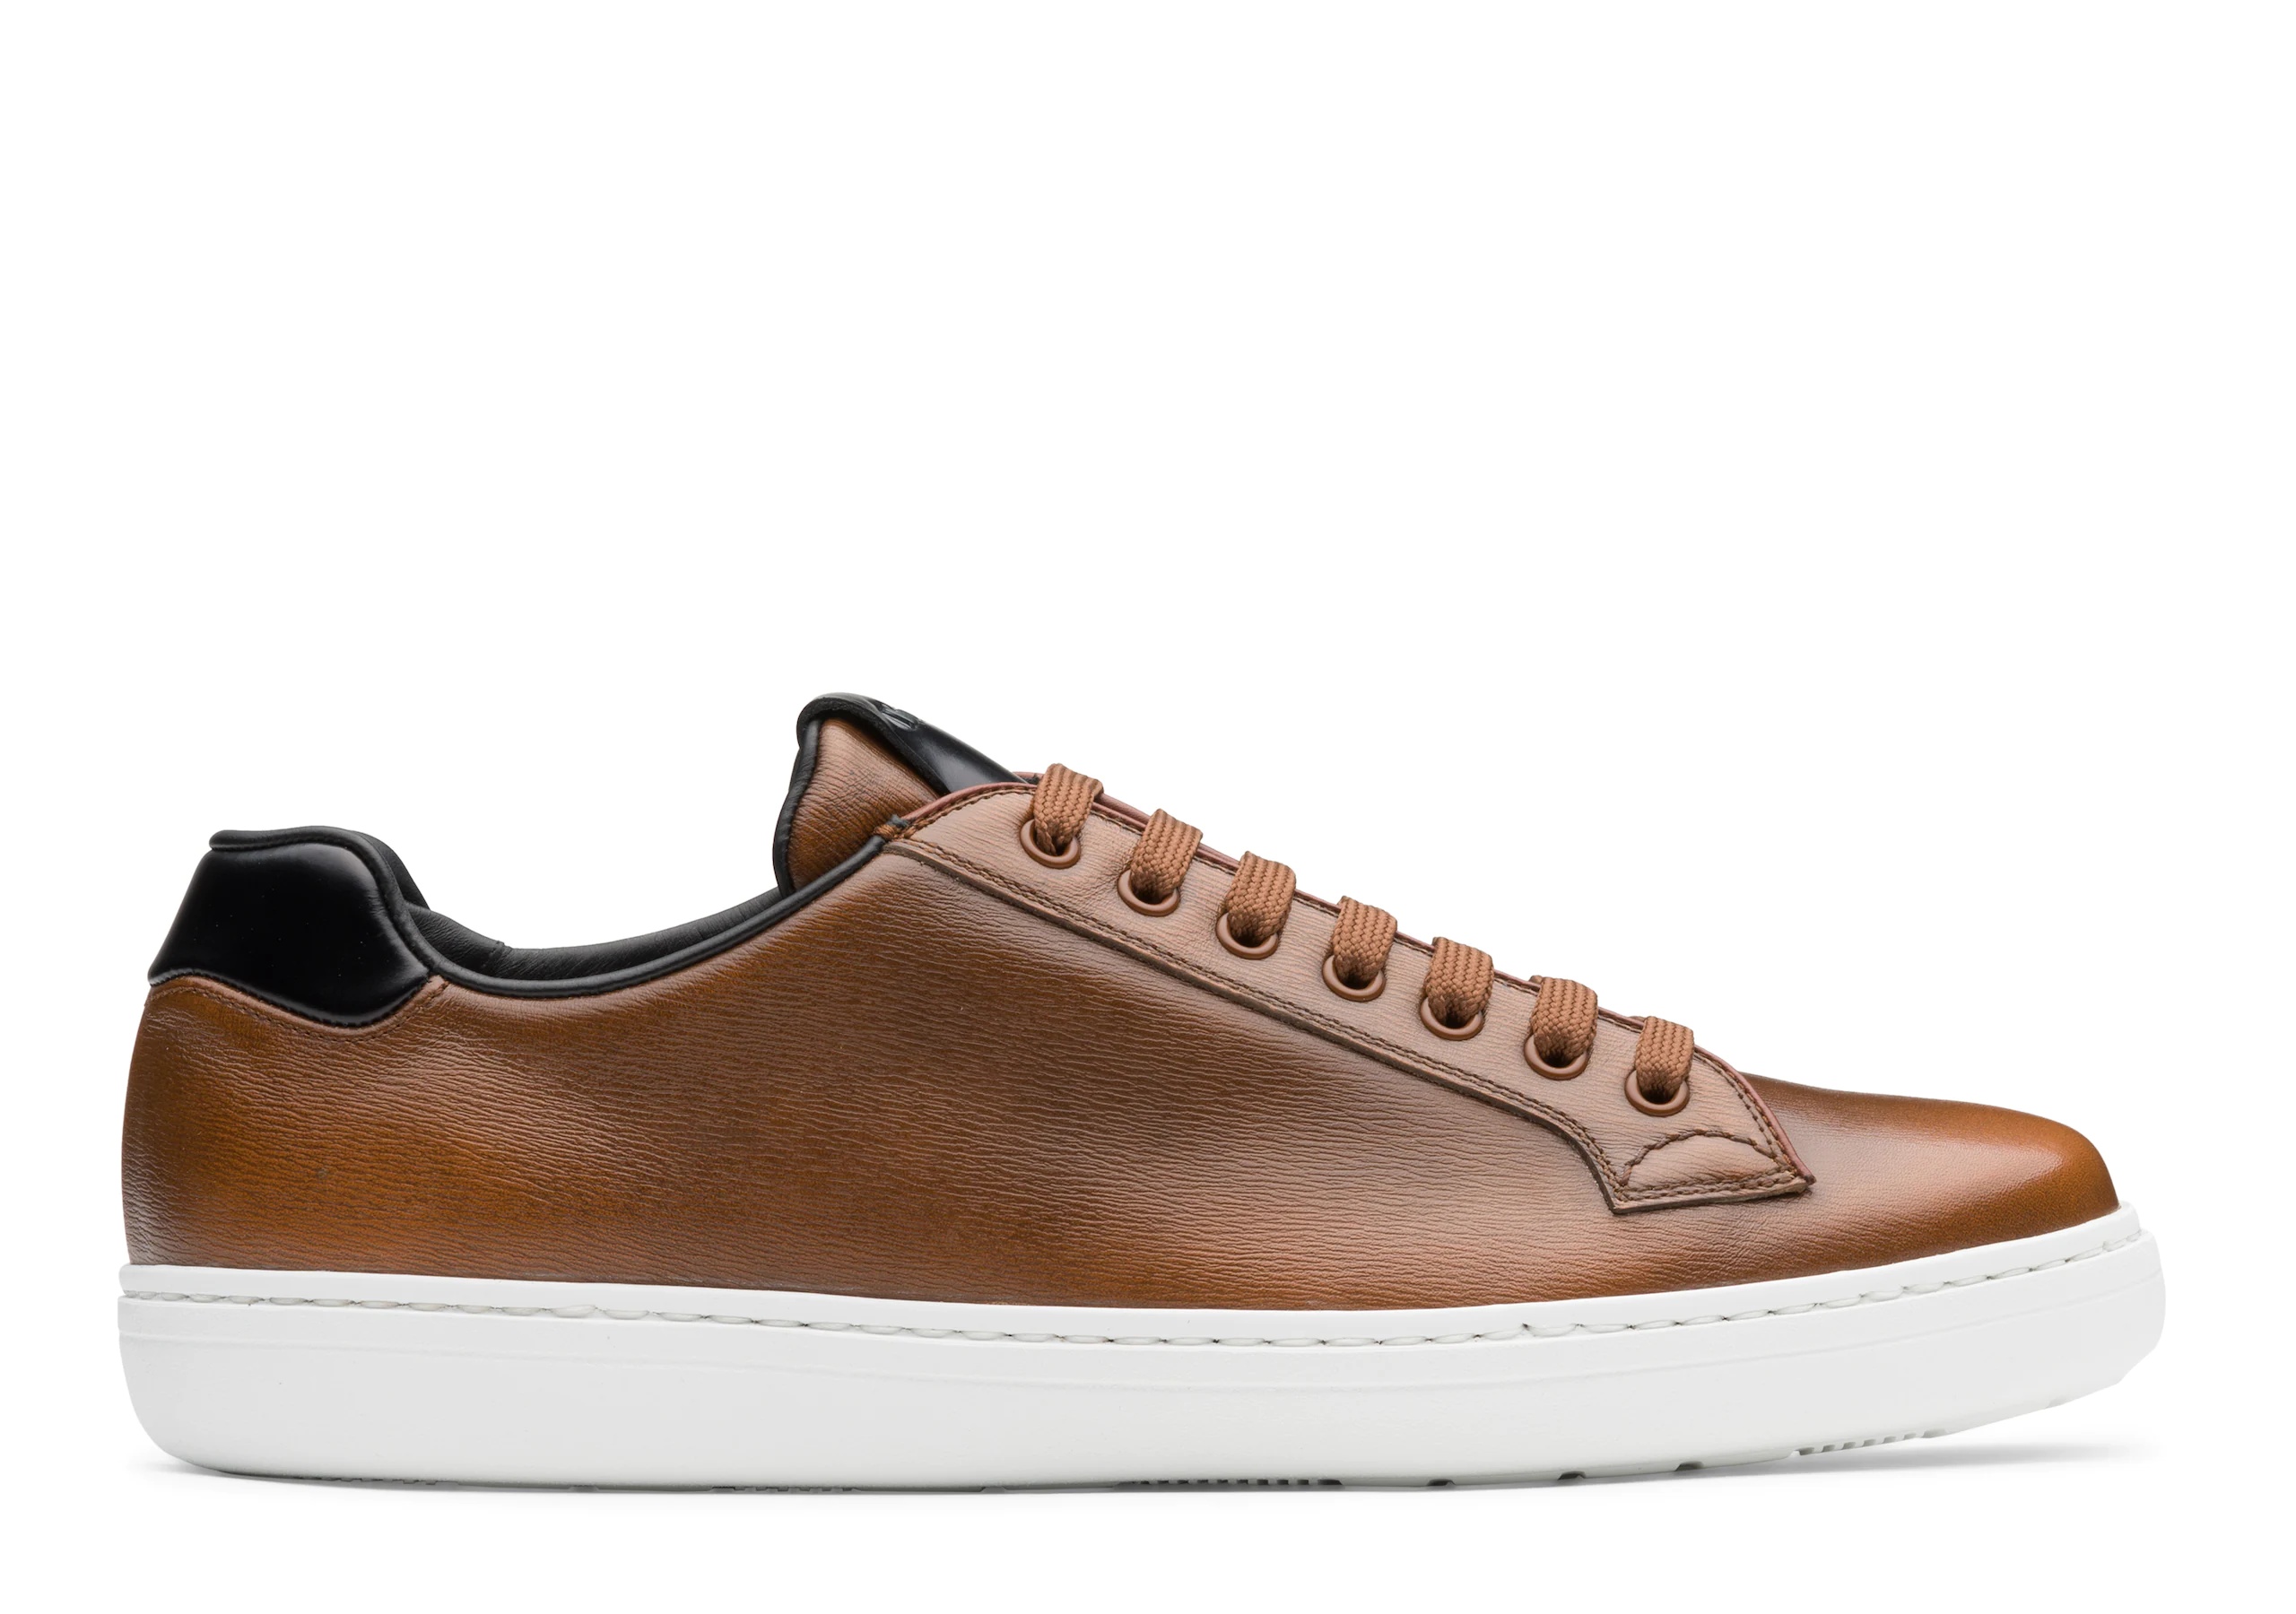 Boland plus 2
St James Leather Classic Sneaker Walnut - 1